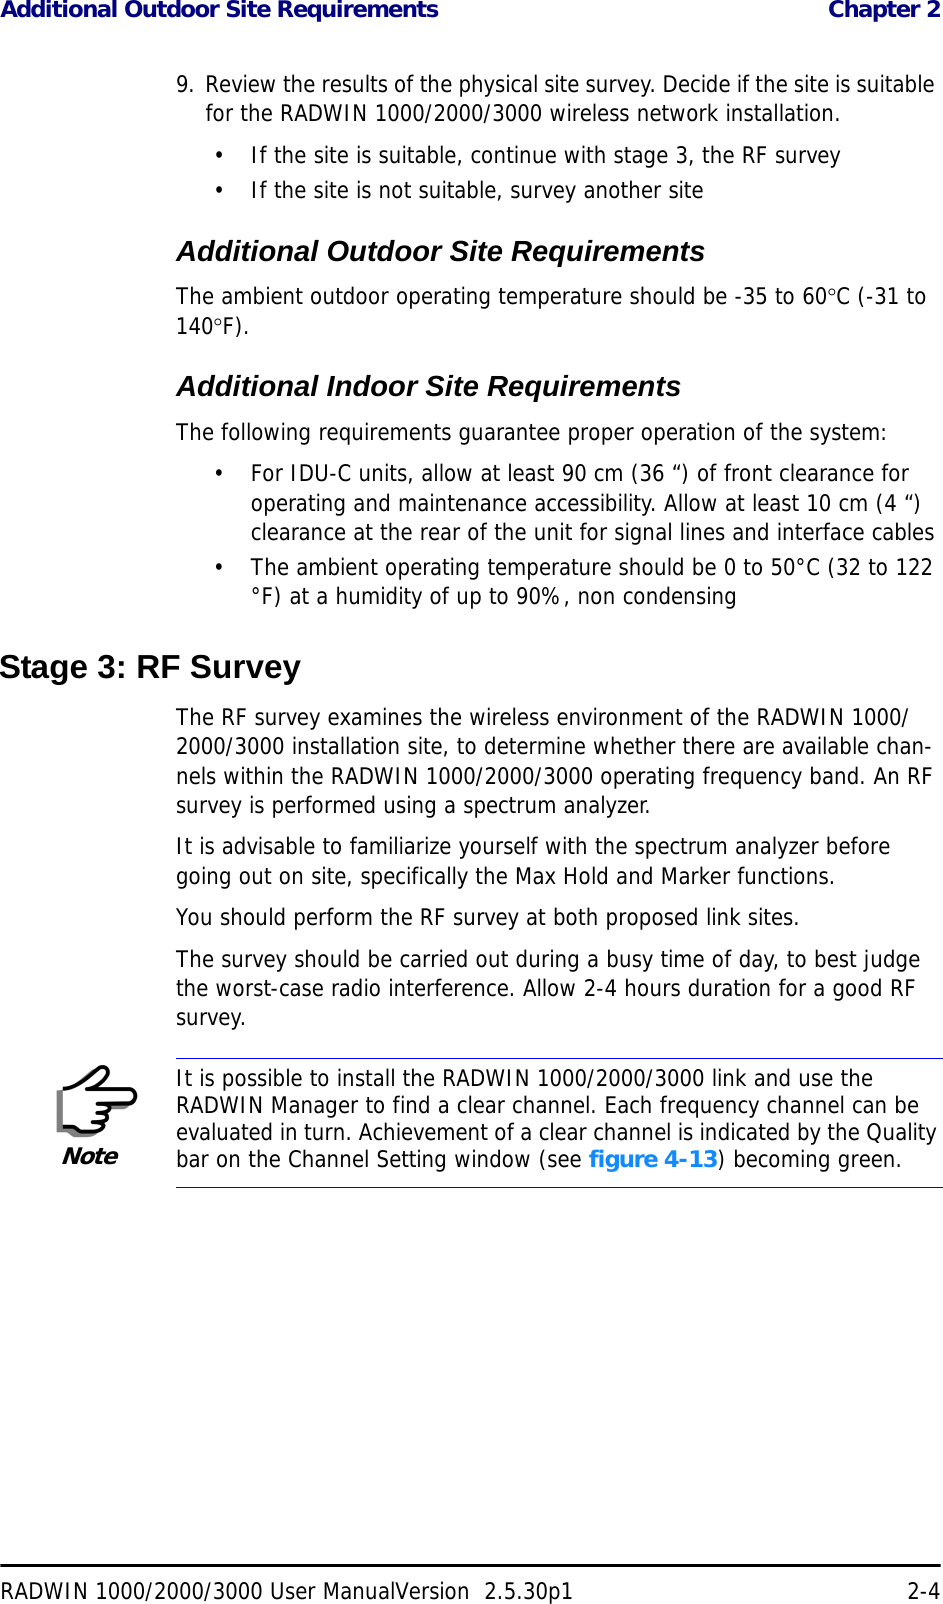 Additional Outdoor Site Requirements  Chapter 2RADWIN 1000/2000/3000 User ManualVersion  2.5.30p1 2-49. Review the results of the physical site survey. Decide if the site is suitable for the RADWIN 1000/2000/3000 wireless network installation.• If the site is suitable, continue with stage 3, the RF survey• If the site is not suitable, survey another siteAdditional Outdoor Site RequirementsThe ambient outdoor operating temperature should be -35 to 60°C (-31 to 140°F).Additional Indoor Site RequirementsThe following requirements guarantee proper operation of the system:• For IDU-C units, allow at least 90 cm (36 “) of front clearance for operating and maintenance accessibility. Allow at least 10 cm (4 “) clearance at the rear of the unit for signal lines and interface cables• The ambient operating temperature should be 0 to 50°C (32 to 122 °F) at a humidity of up to 90%, non condensingStage 3: RF SurveyThe RF survey examines the wireless environment of the RADWIN 1000/2000/3000 installation site, to determine whether there are available chan-nels within the RADWIN 1000/2000/3000 operating frequency band. An RF survey is performed using a spectrum analyzer.It is advisable to familiarize yourself with the spectrum analyzer before going out on site, specifically the Max Hold and Marker functions.You should perform the RF survey at both proposed link sites.The survey should be carried out during a busy time of day, to best judge the worst-case radio interference. Allow 2-4 hours duration for a good RF survey.NoteIt is possible to install the RADWIN 1000/2000/3000 link and use the RADWIN Manager to find a clear channel. Each frequency channel can be evaluated in turn. Achievement of a clear channel is indicated by the Quality bar on the Channel Setting window (see figure 4-13) becoming green.